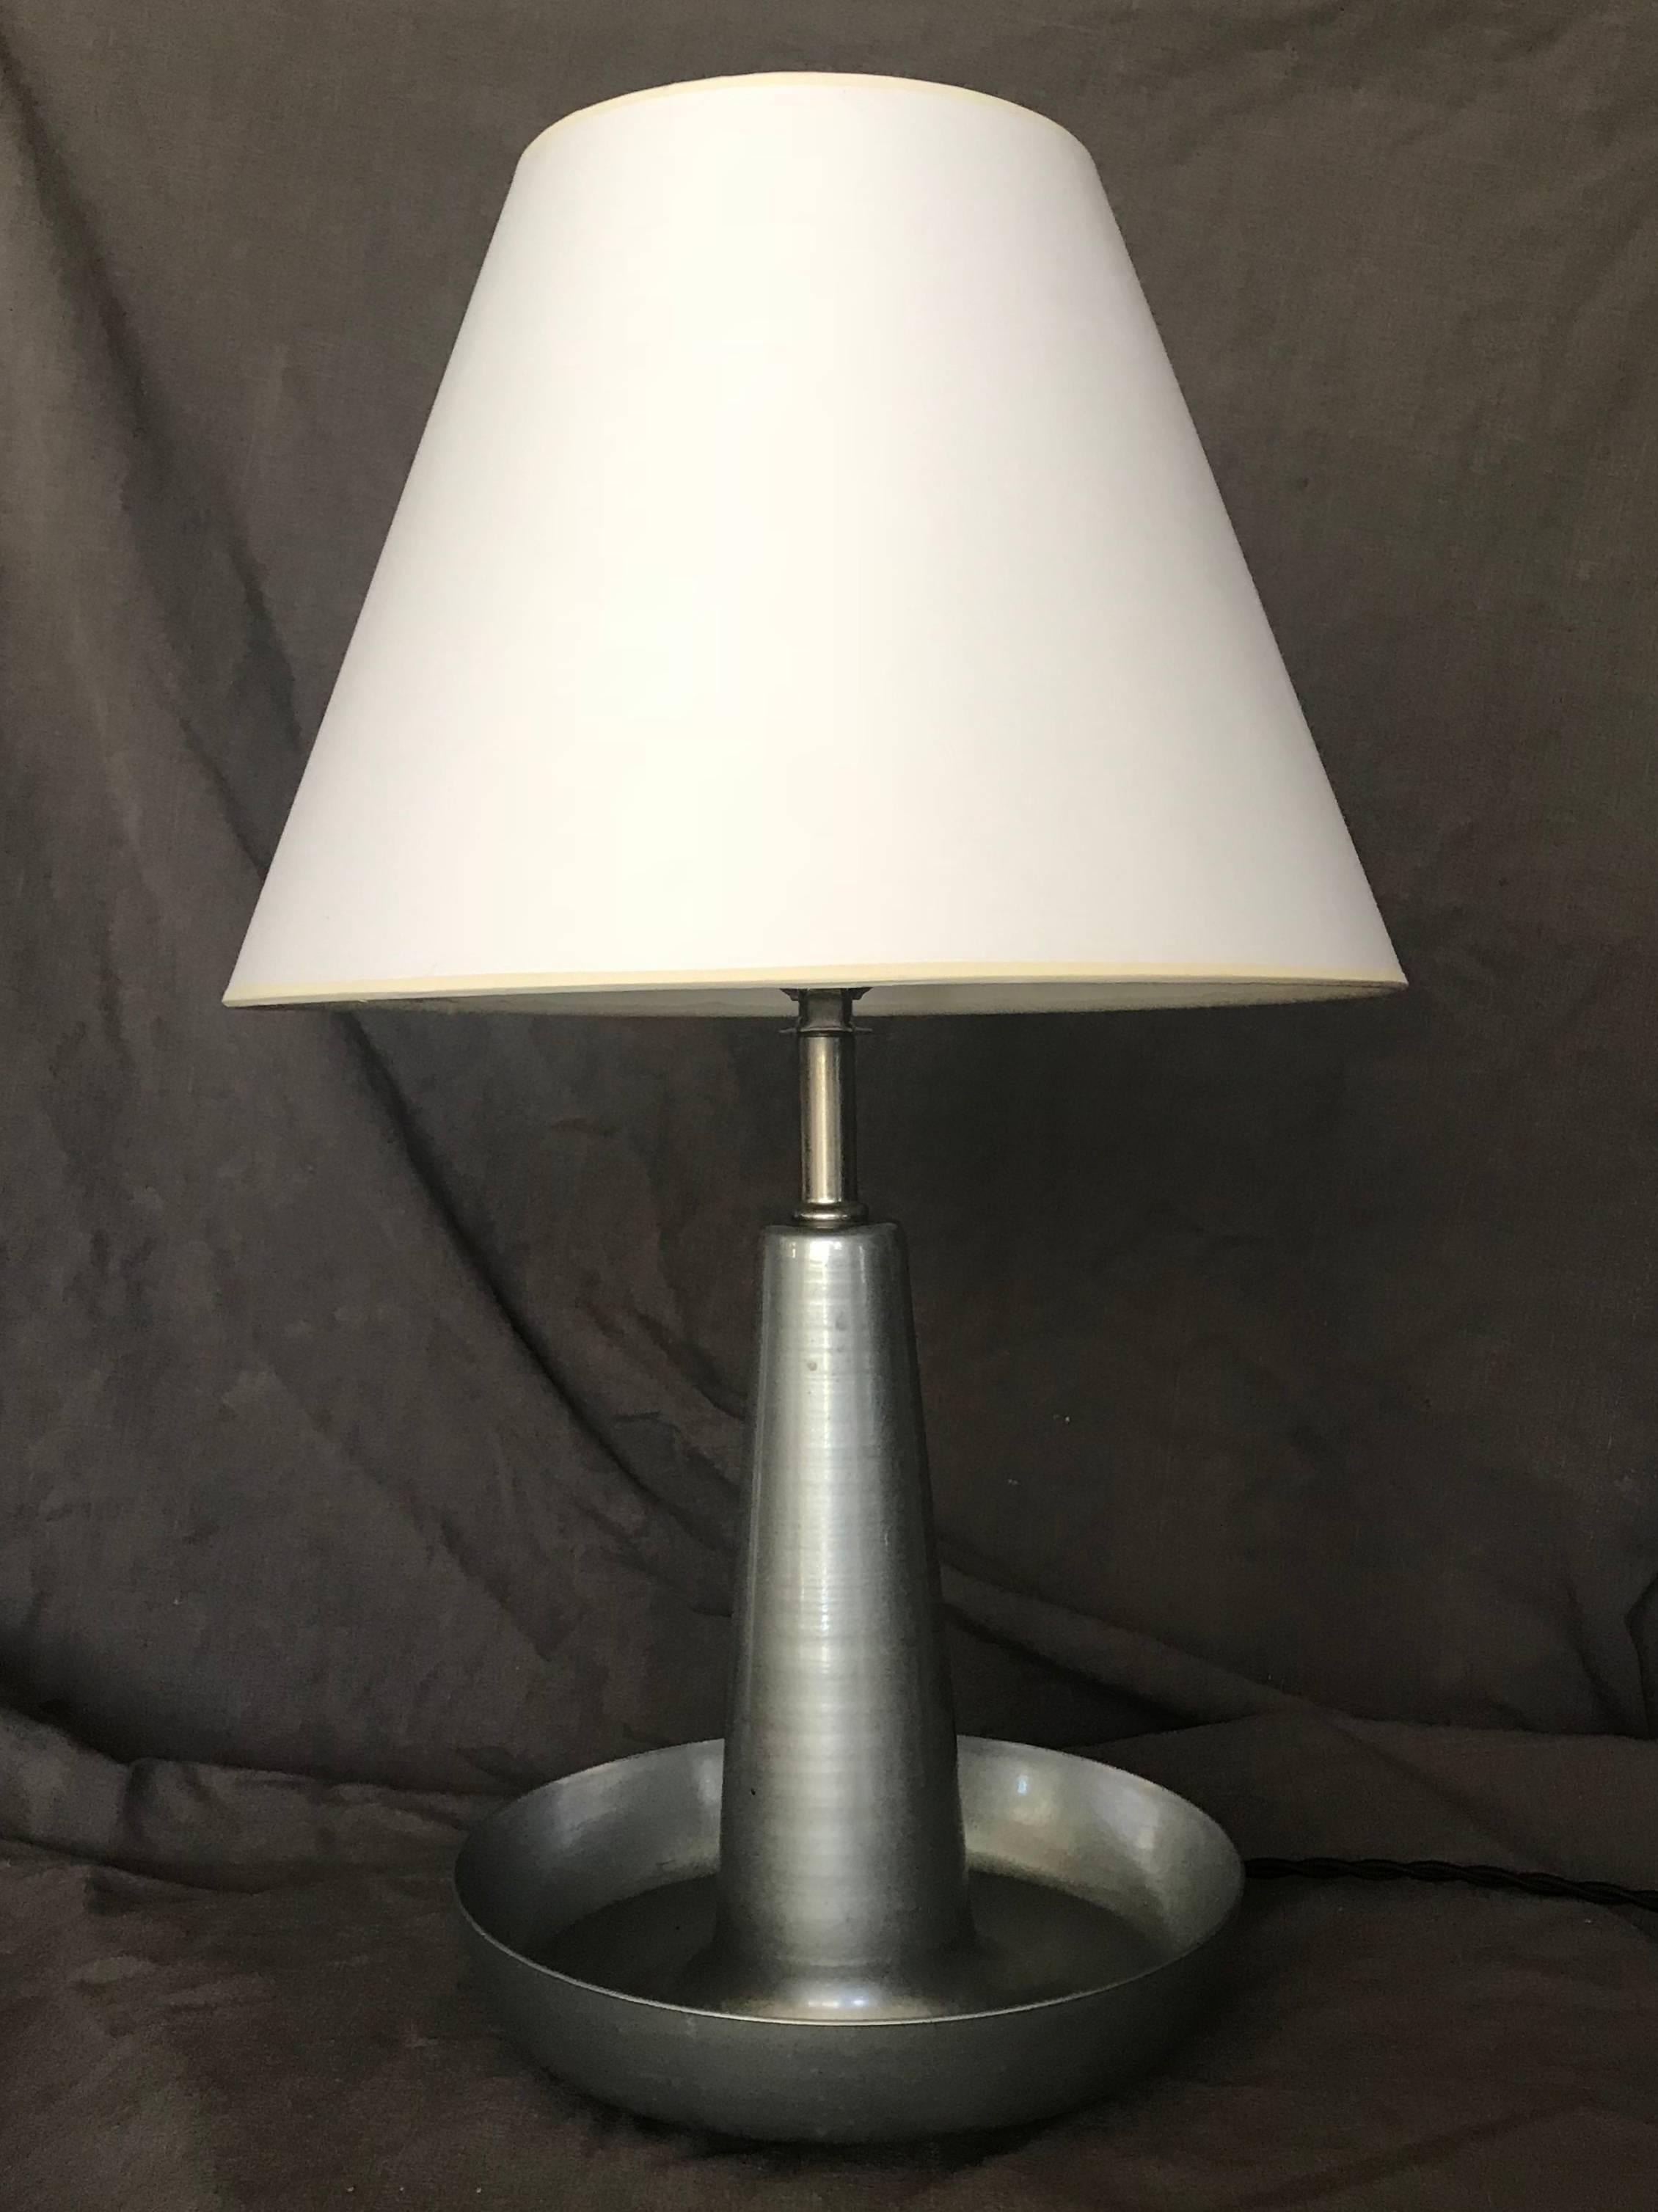 Pair of mid-century aluminum lamps. Pair sleek, quiet modern lamps in aluminum newly rewired with black silk cords and switches. American, late 1960s lampshades are optional and not included. 
Dimensions: bowl 8.5